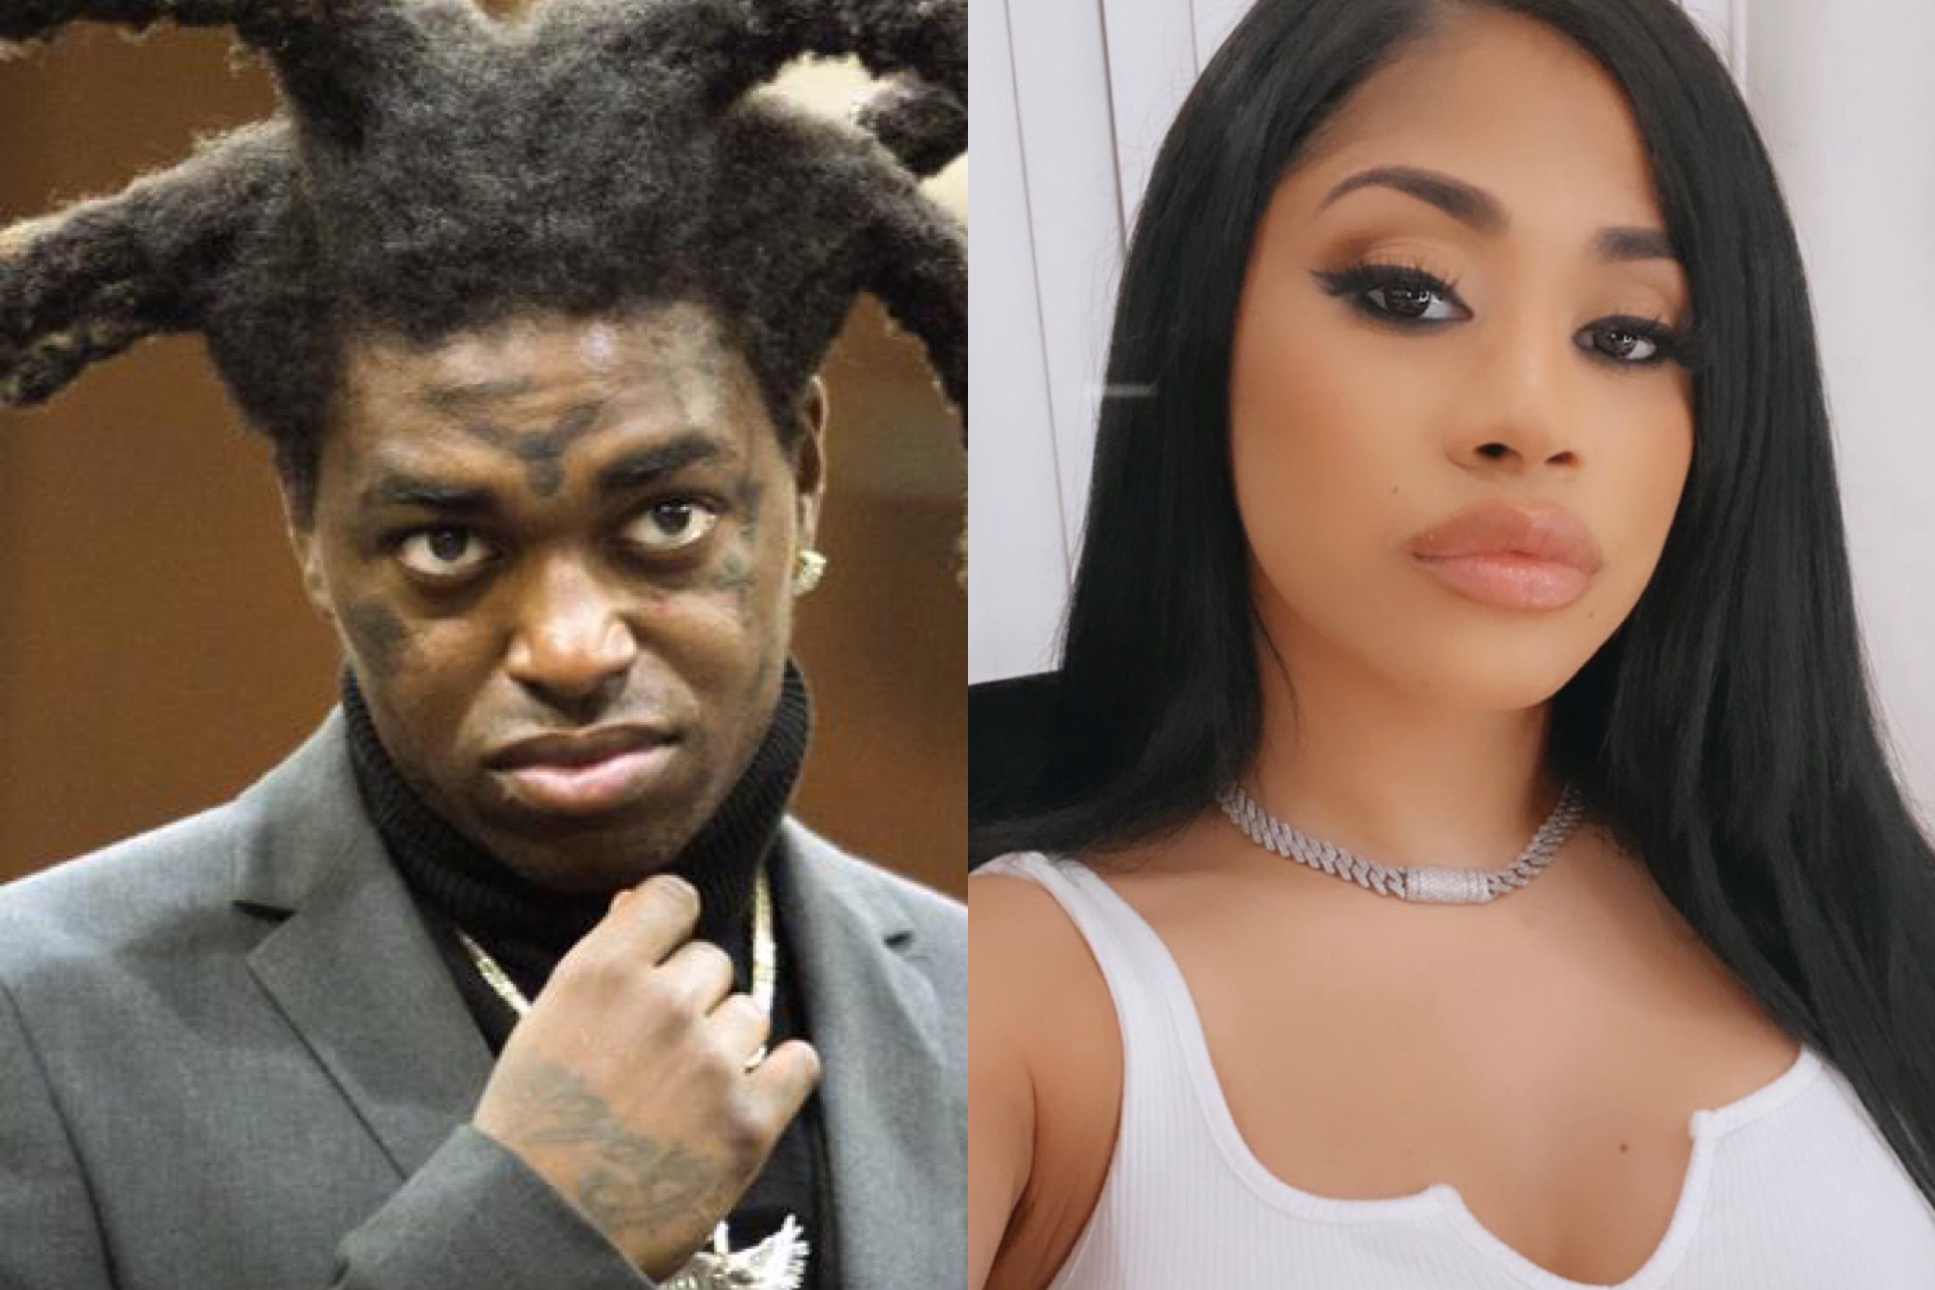 Kodak Black Attempts To Shoot His Shot At Cardi B's Sister Hennessy  Carolina With Instagram Post